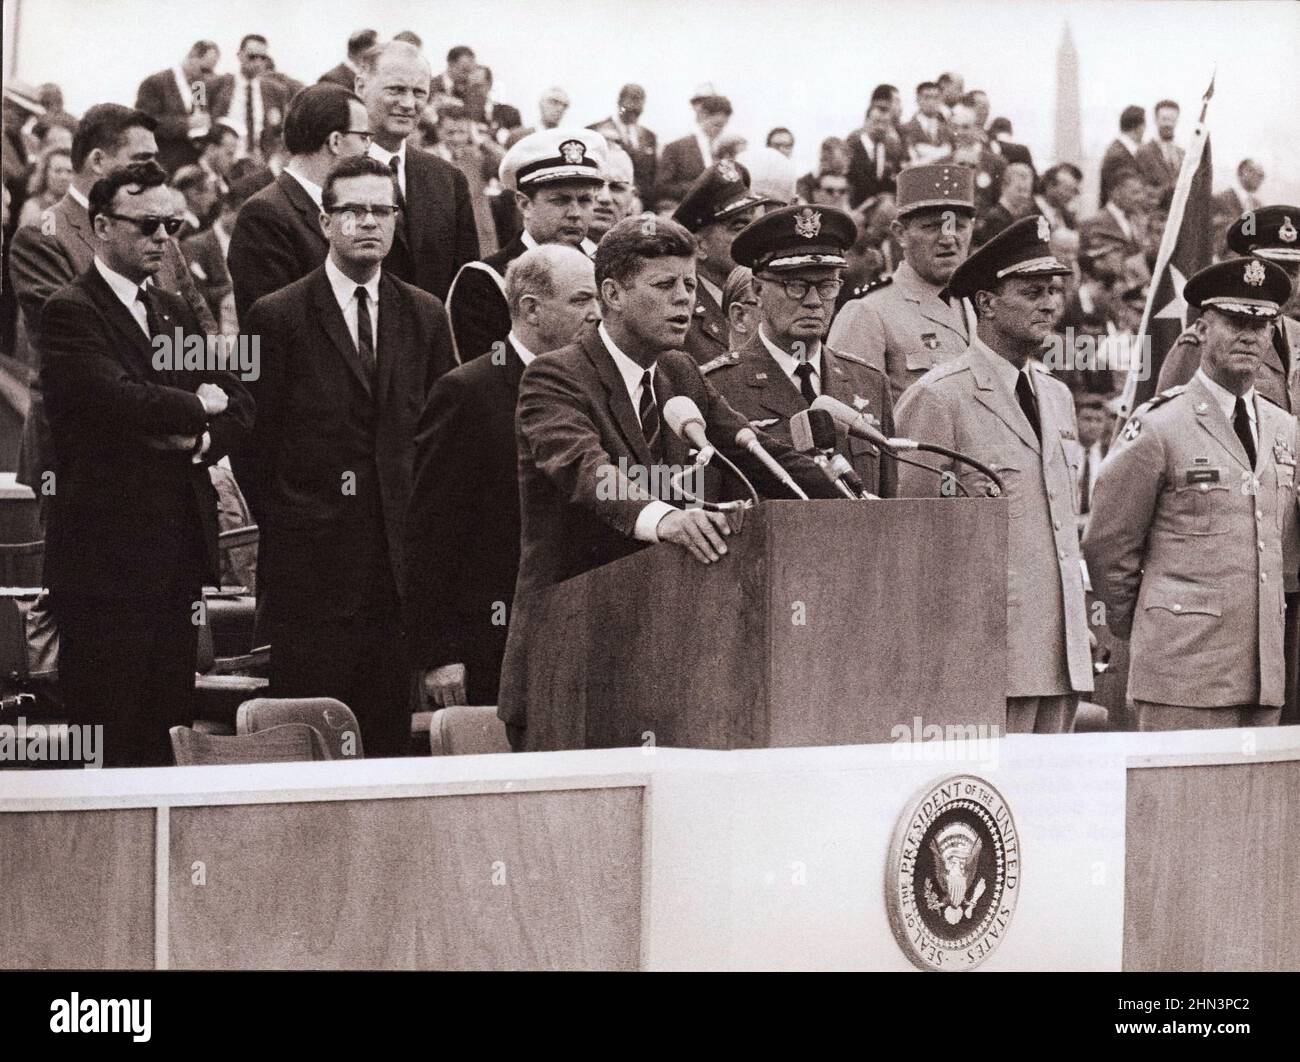 Vintage photo of Berlin Crisis of 1961: Building the Wall. President Kennedy in Germany. Frankfurt, June 25, 1963 - President Kennedy today visited th Stock Photo